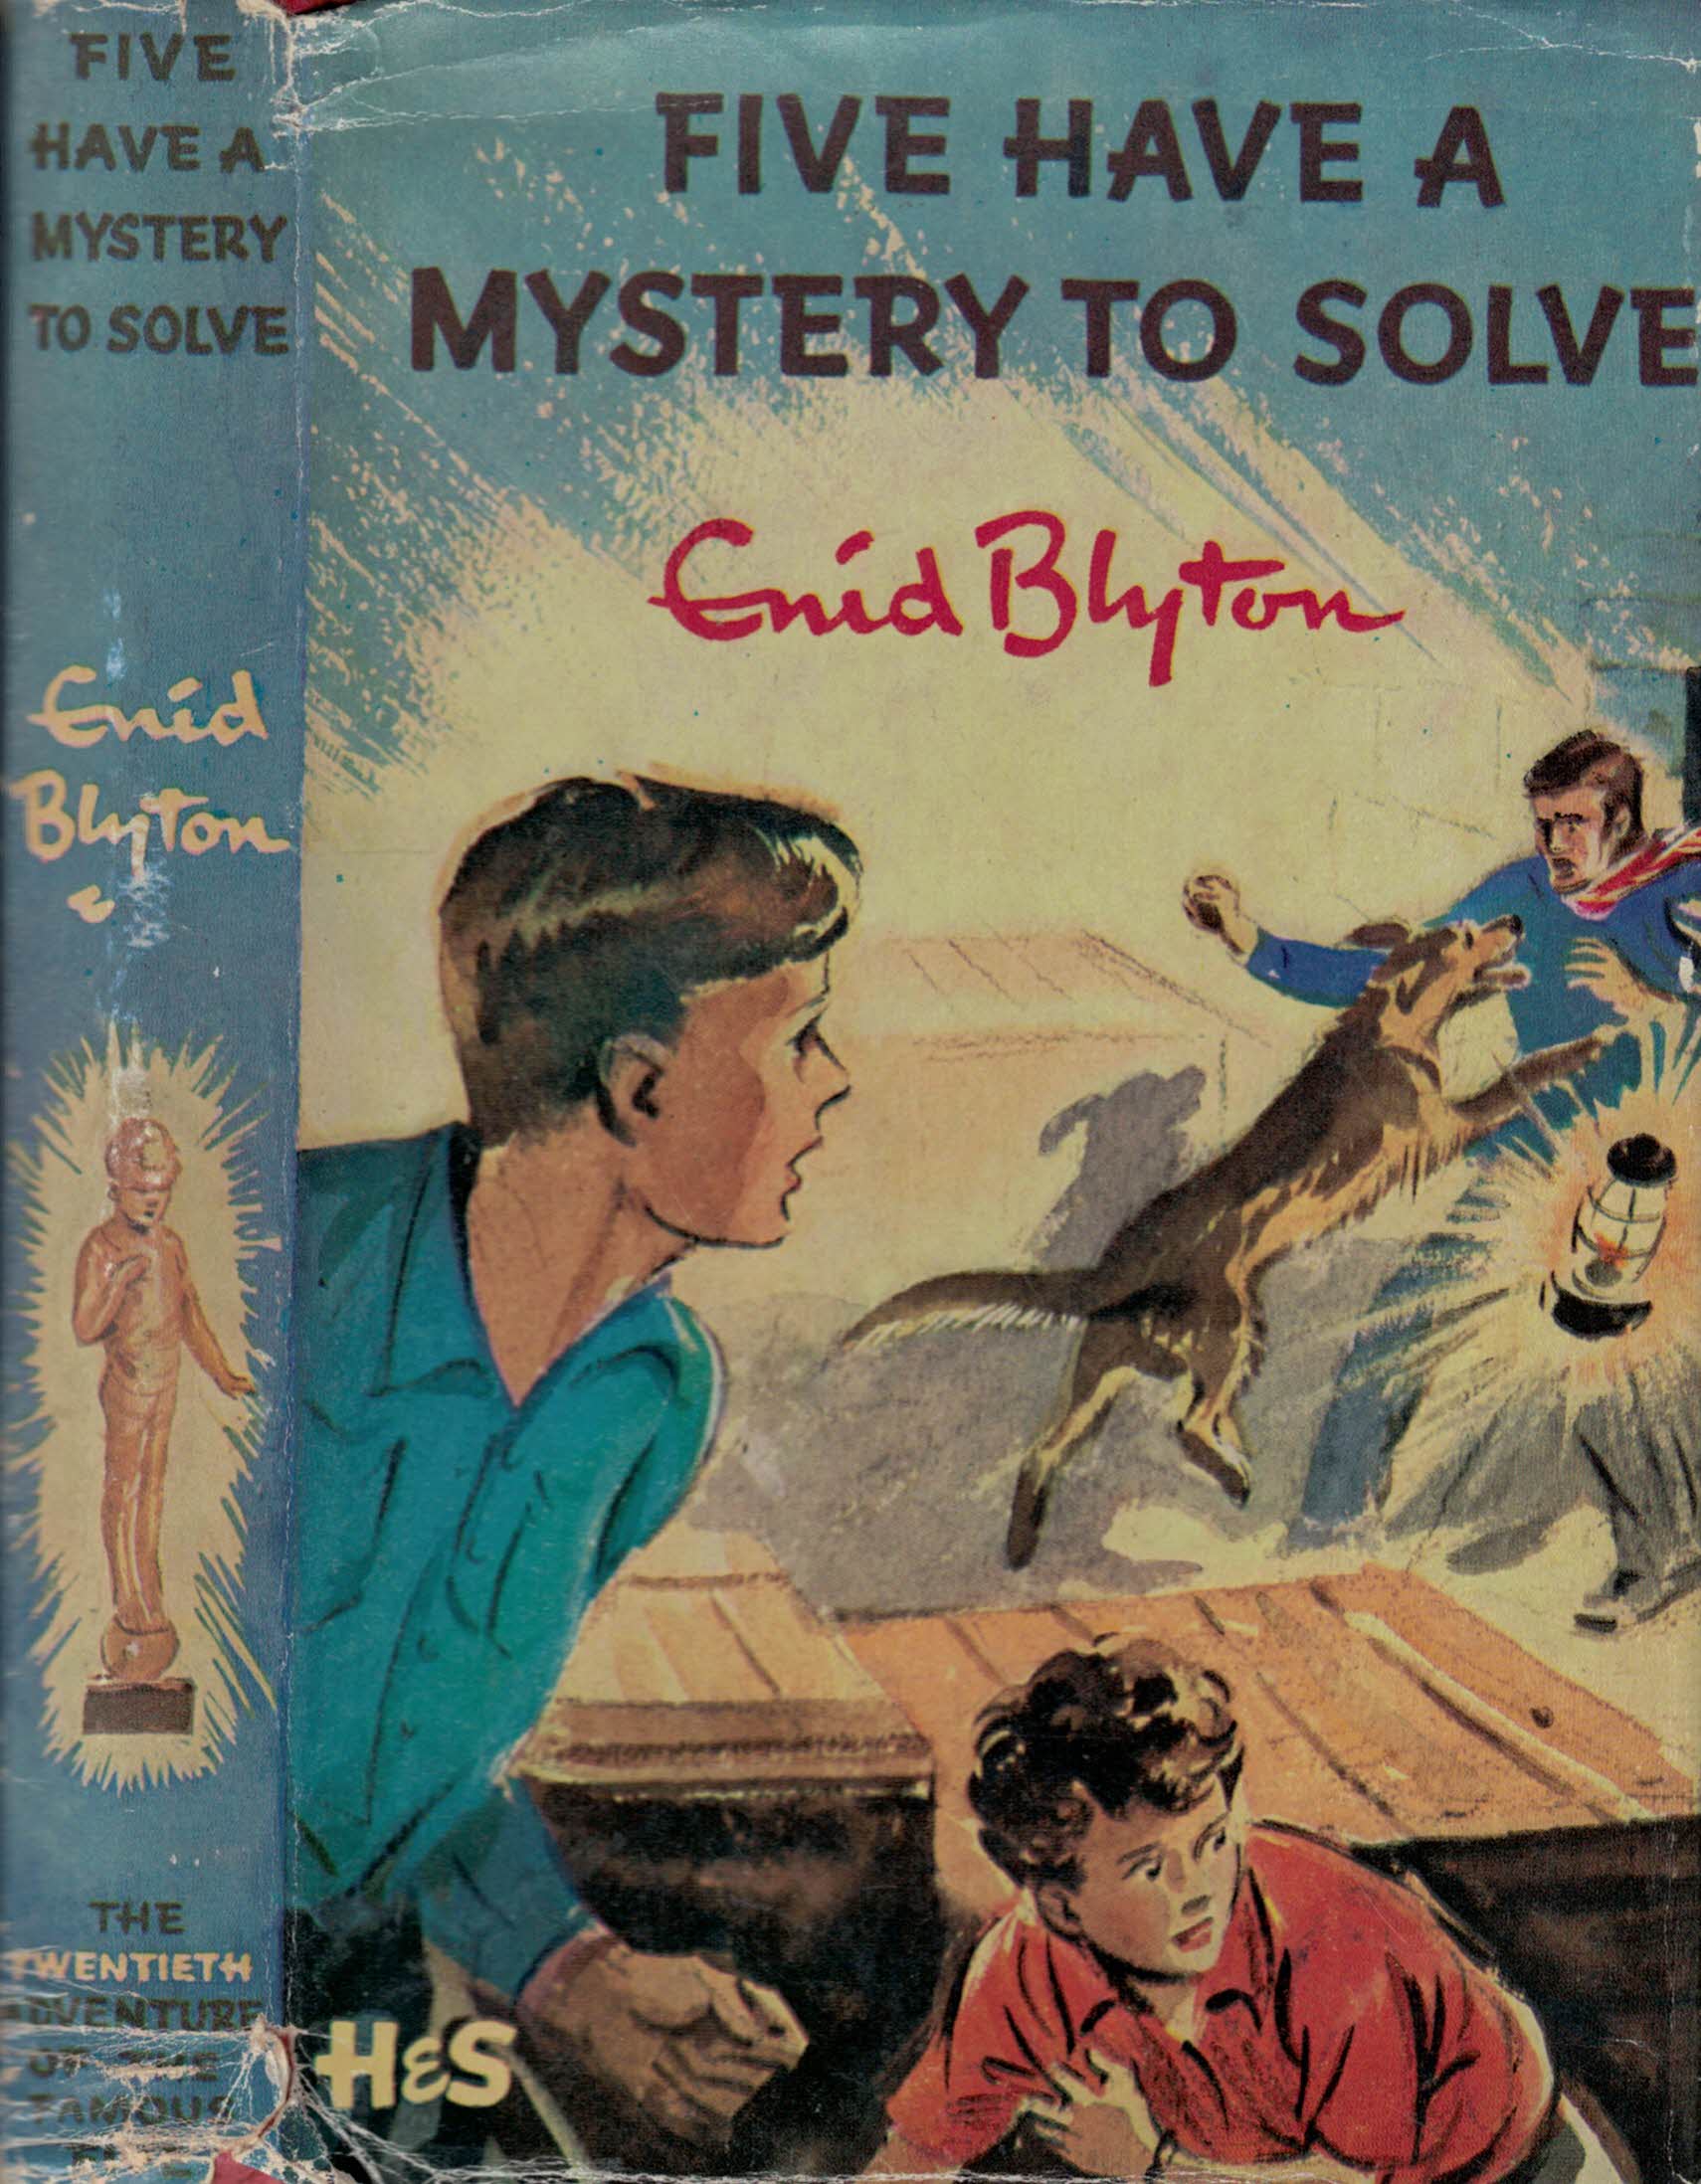 Five Have a Mystery to Solve. 1962.